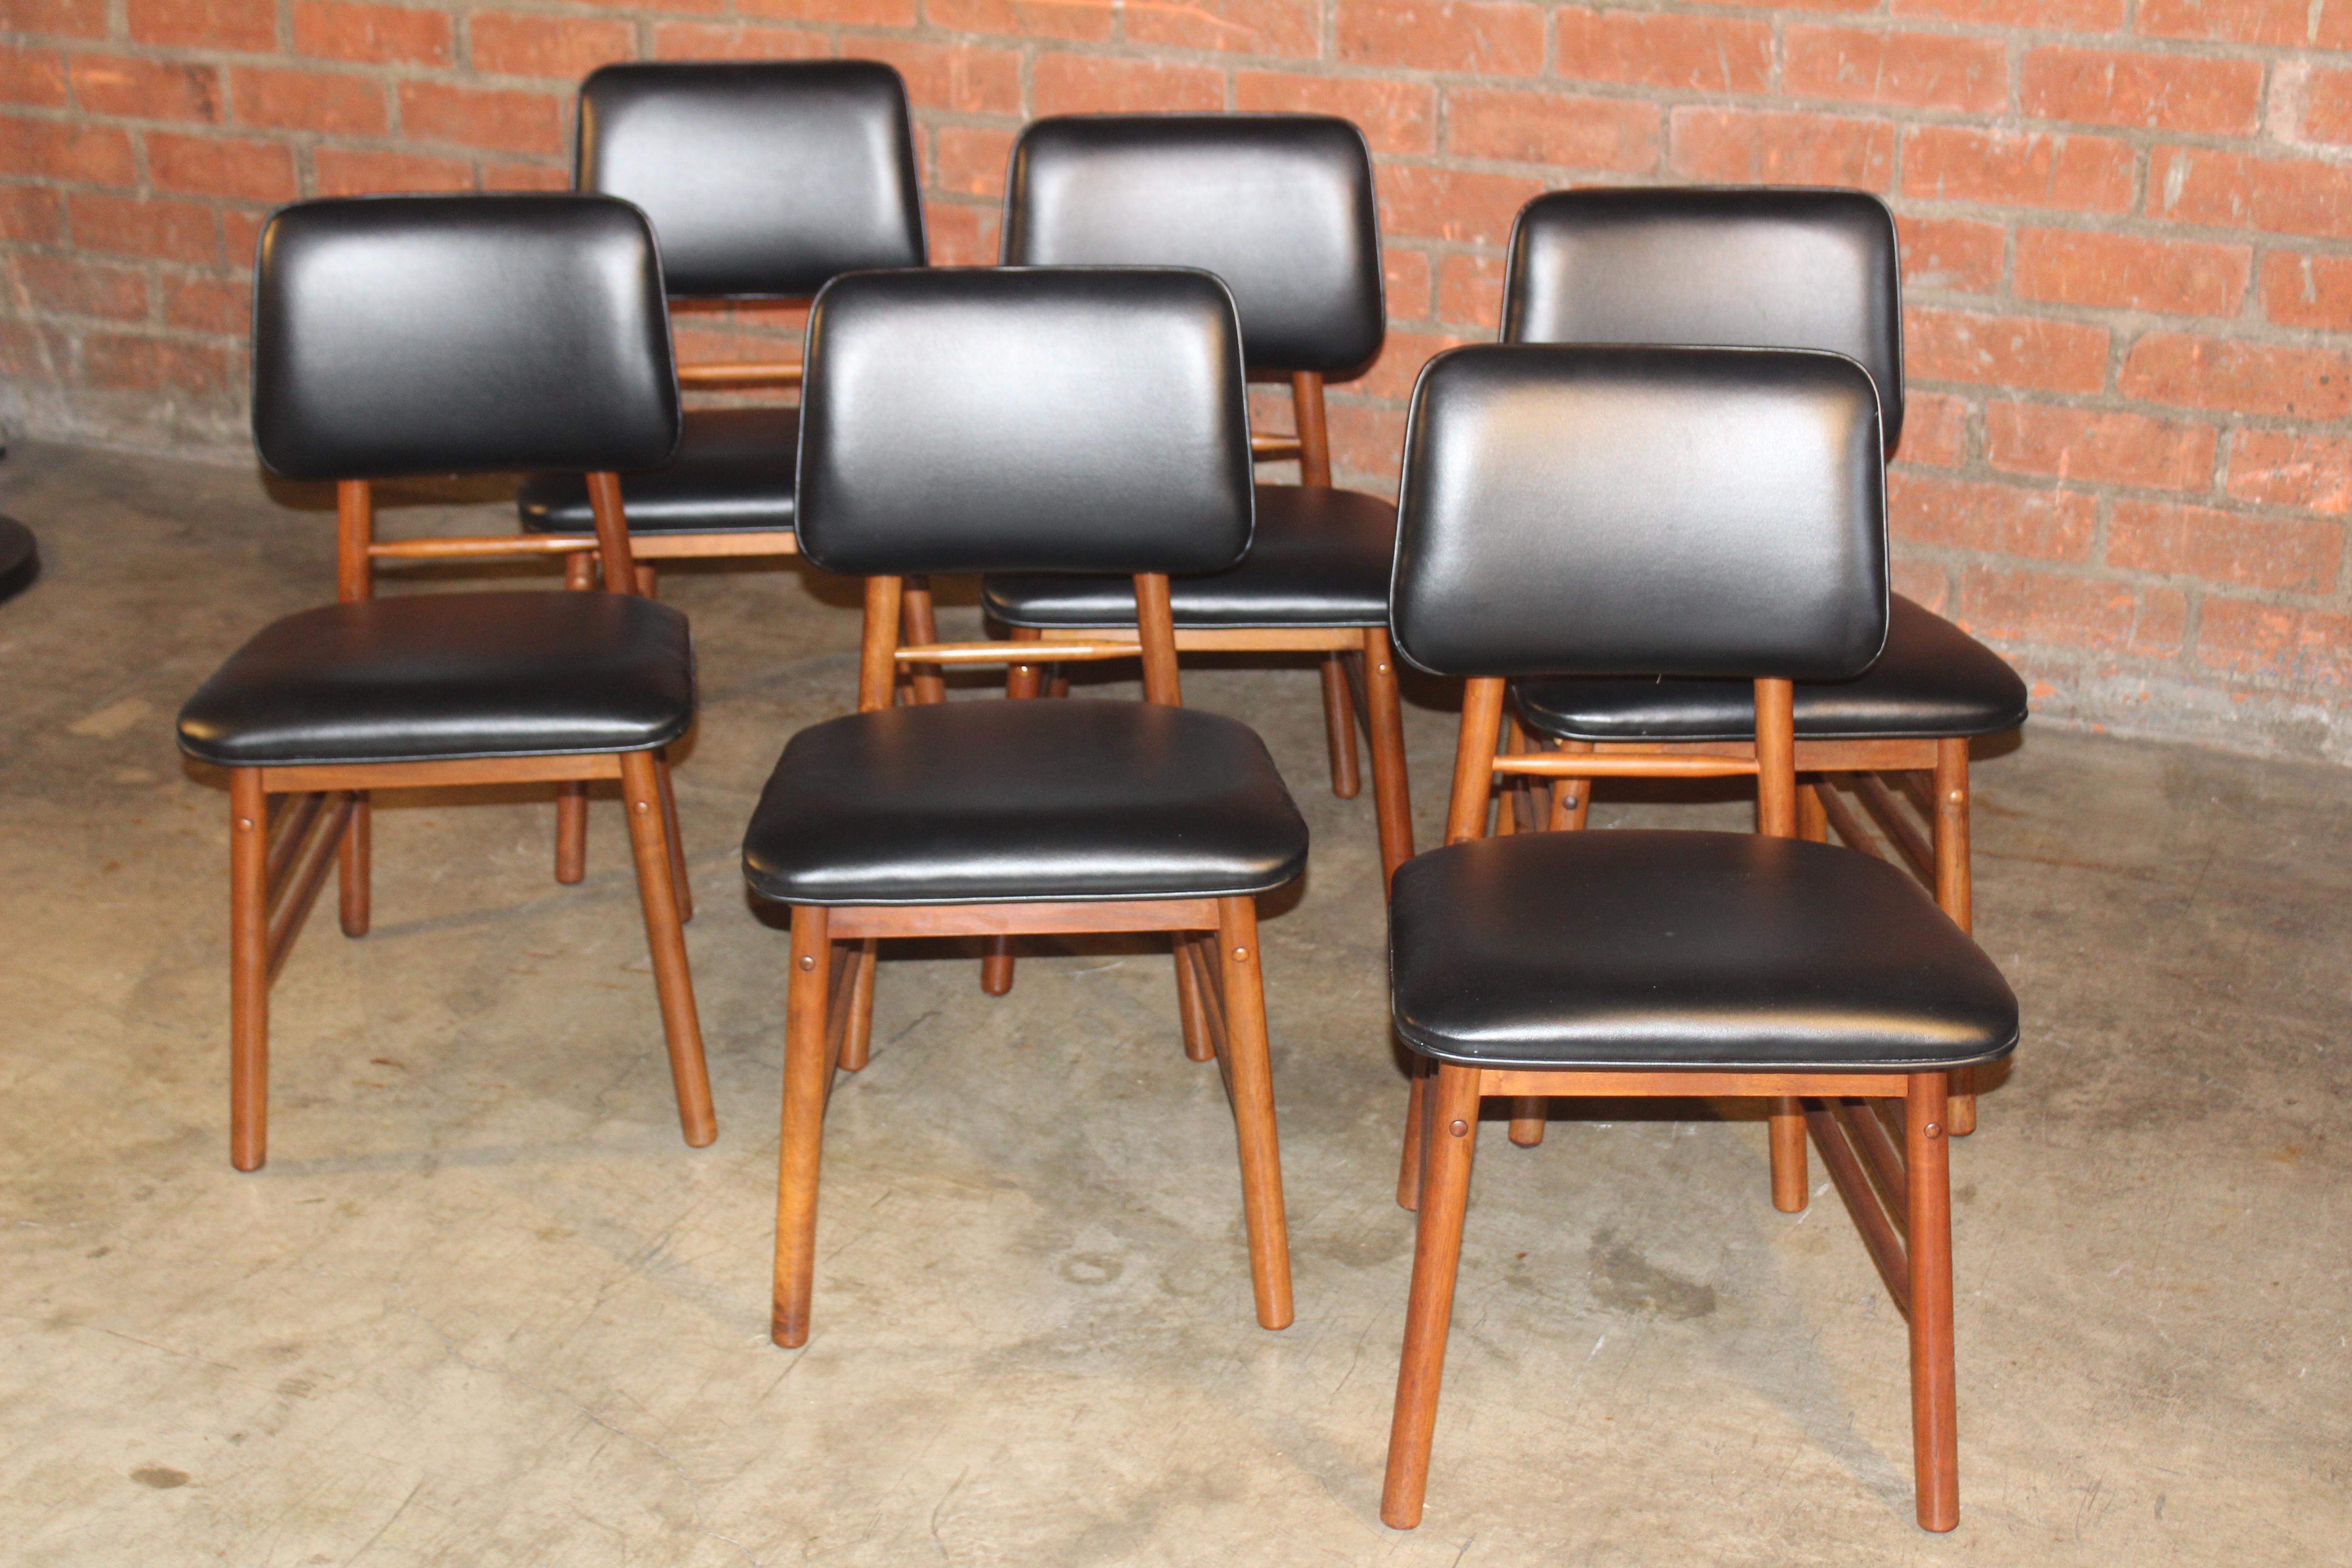 Mid-Century Modern Set of Six Dining Chairs by Greta Grossman, 1950s For Sale